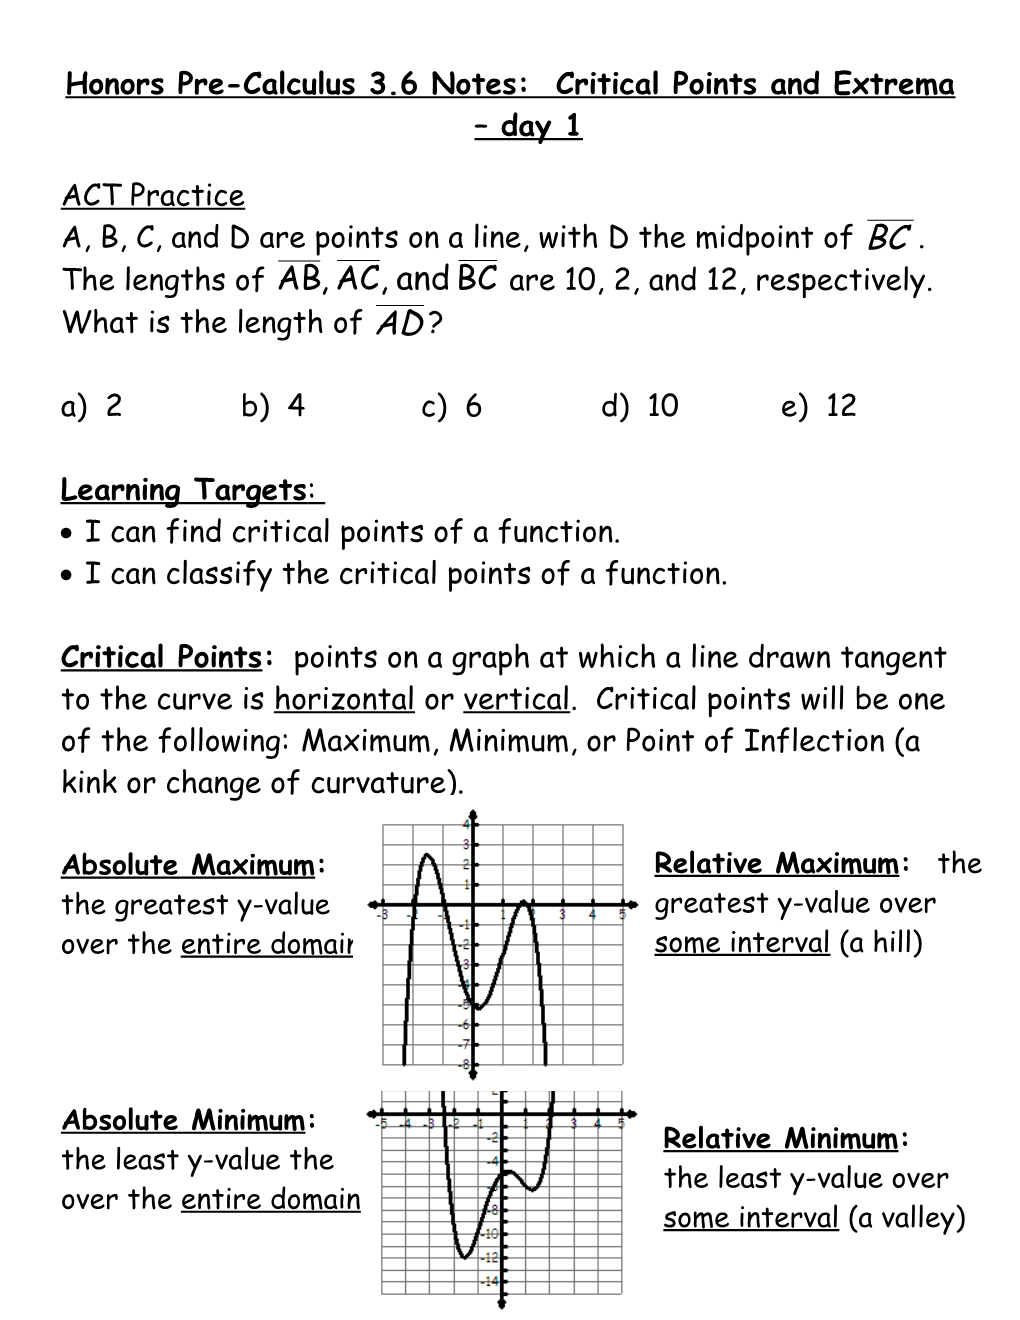 Honors Pre-Calculus 3.6 Notes: Critical Points and Extrema Day 1